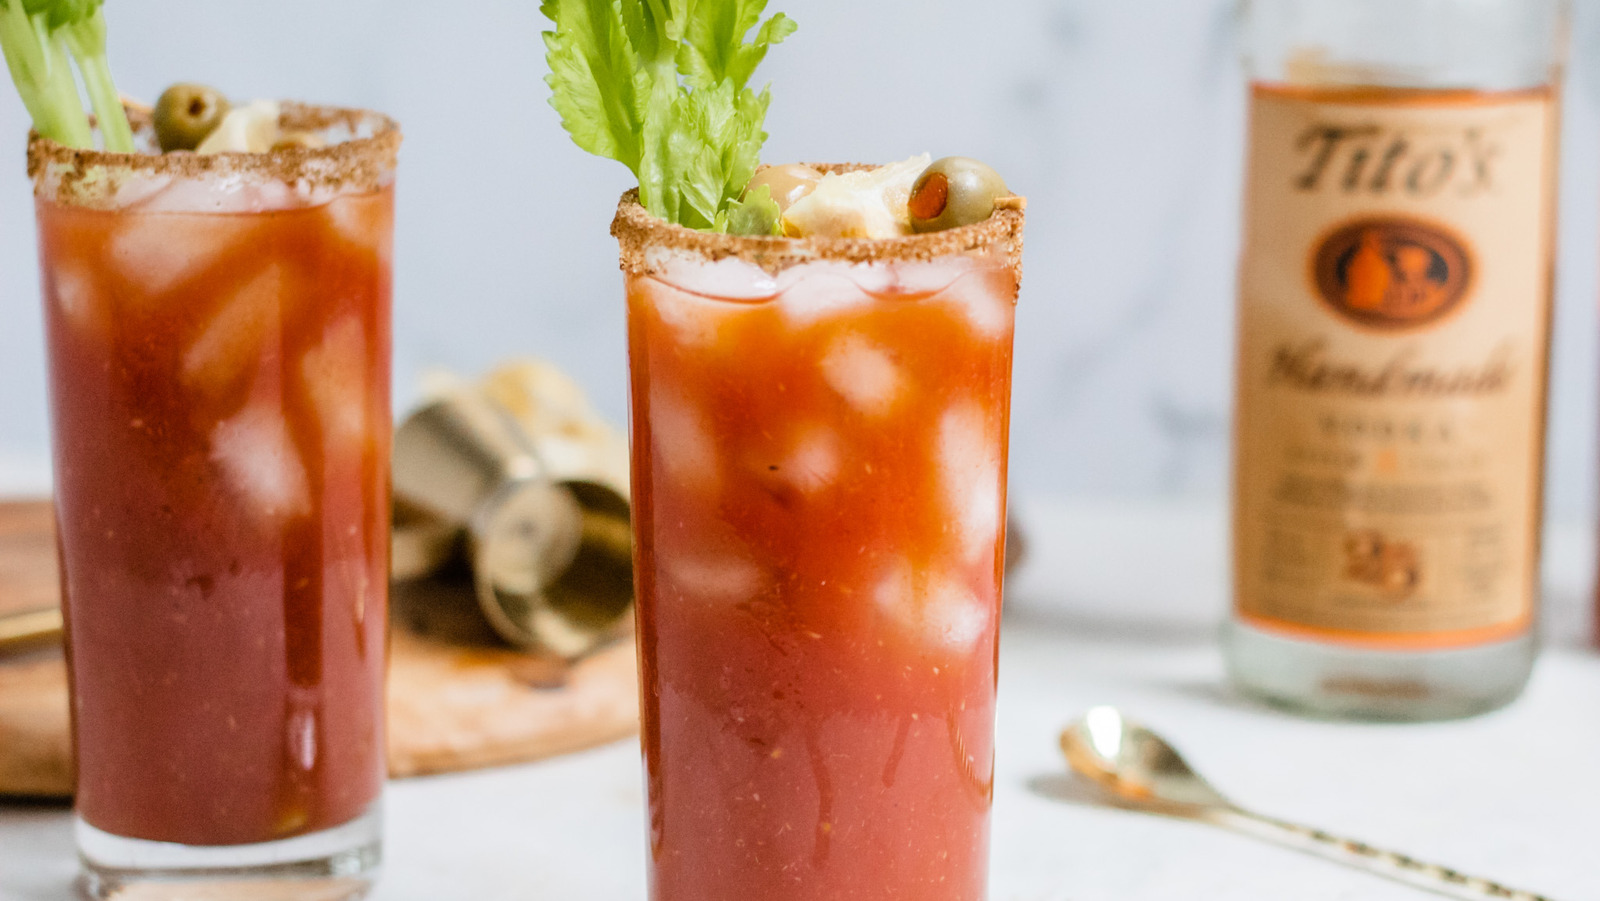 https://www.mashed.com/img/gallery/classic-bloody-mary-recipe/l-intro-1656195472.jpg